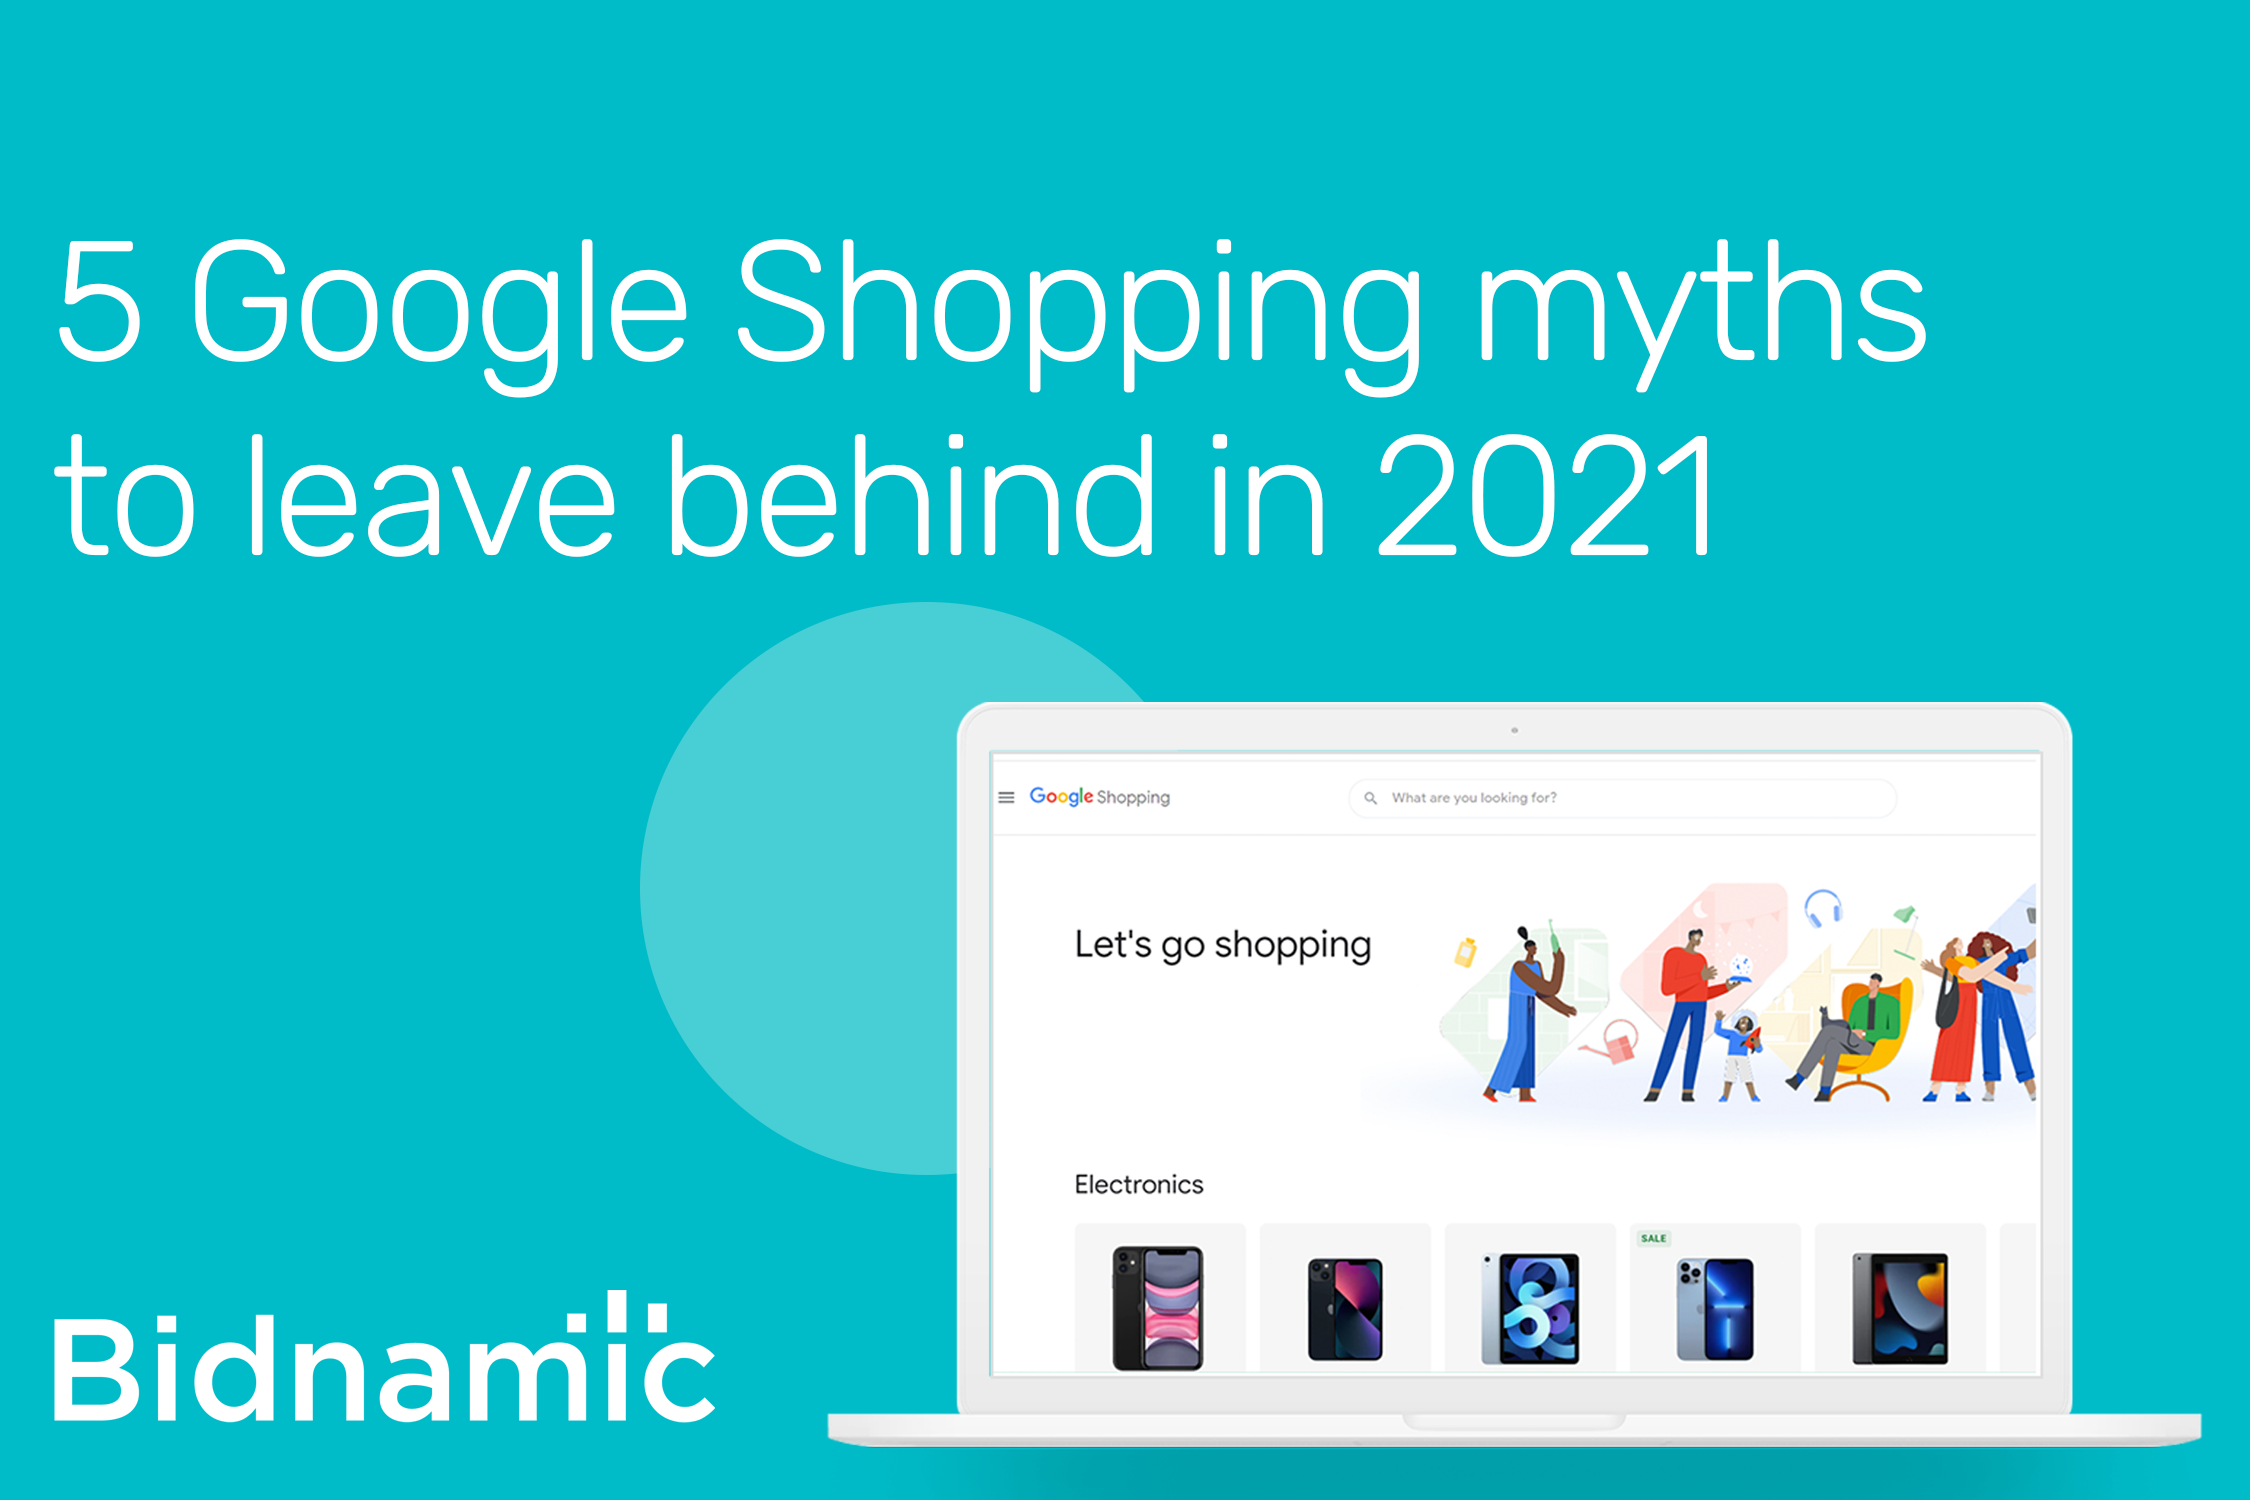 5 Google Shopping myths to leave behind in 2021